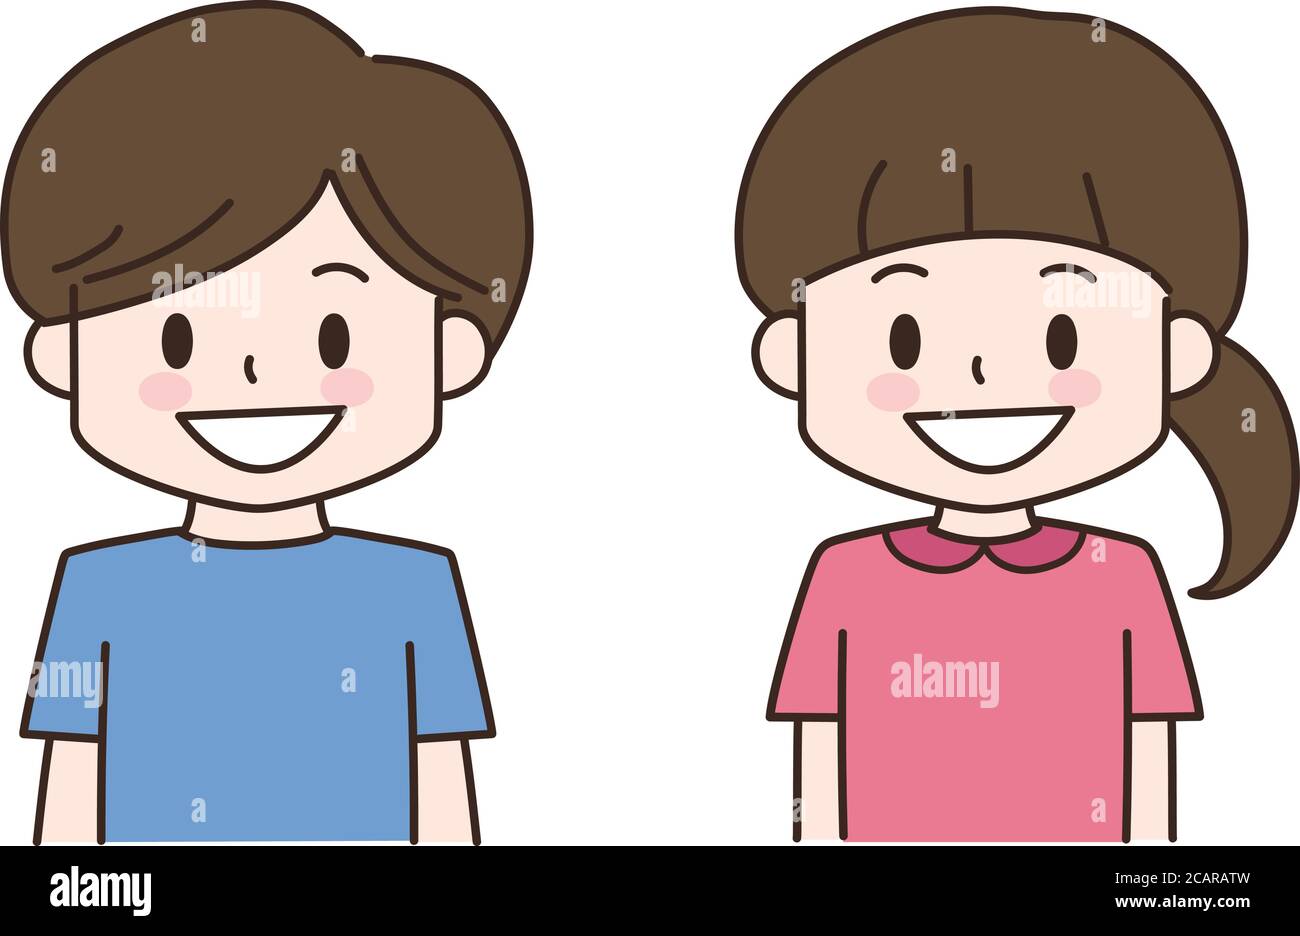 Boy and girl smiling. Vector illustration in cartoon style isolated on white background. Stock Vector